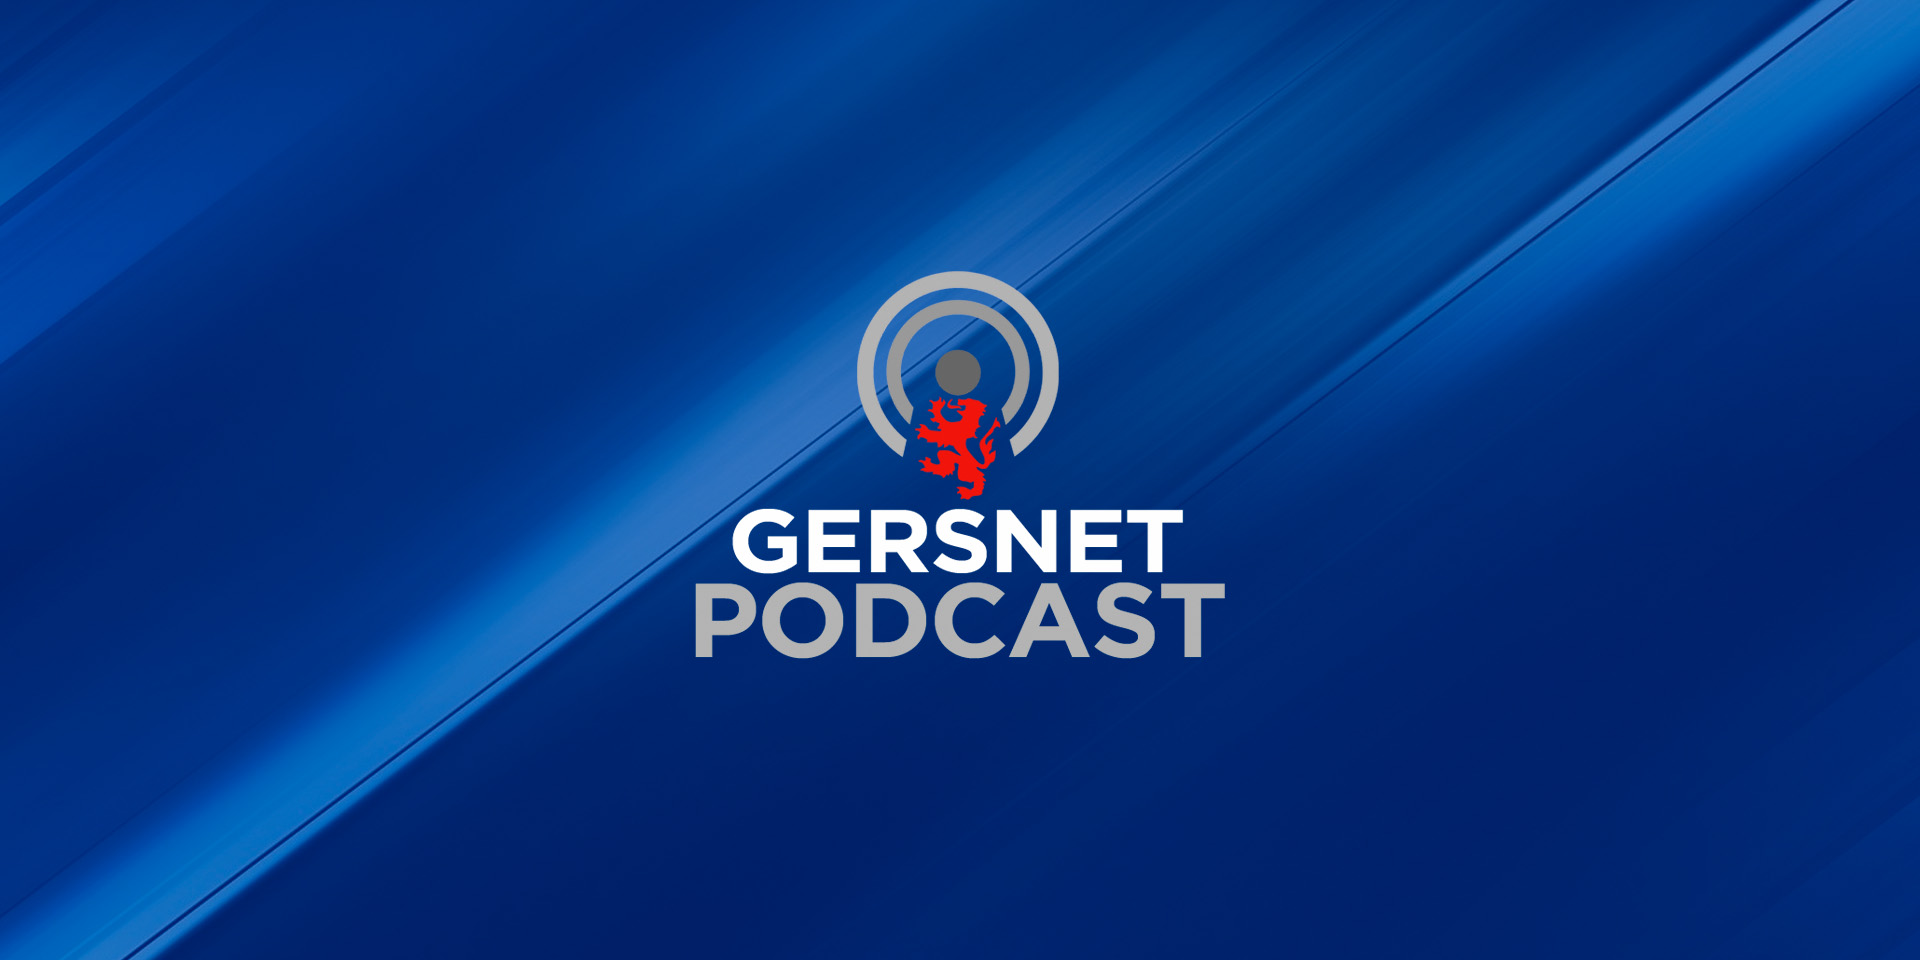 Gersnet Podcast 318 - Motherwell Preview